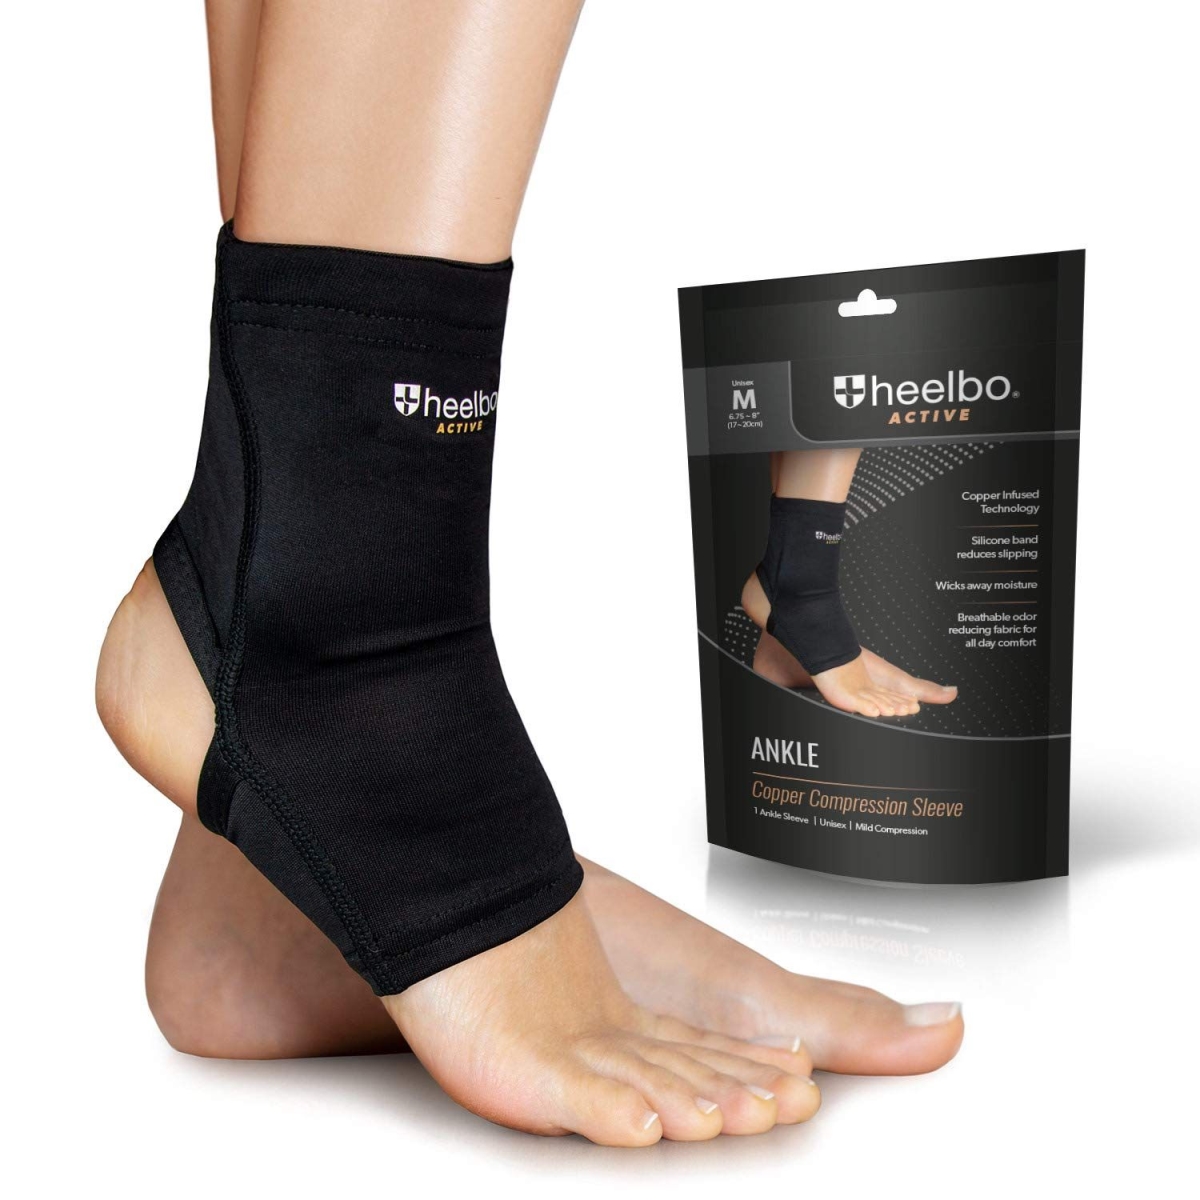 Picture of Heelbo 630-6559-0122 Ankle Copper Compression Sleeve - Black - Medium